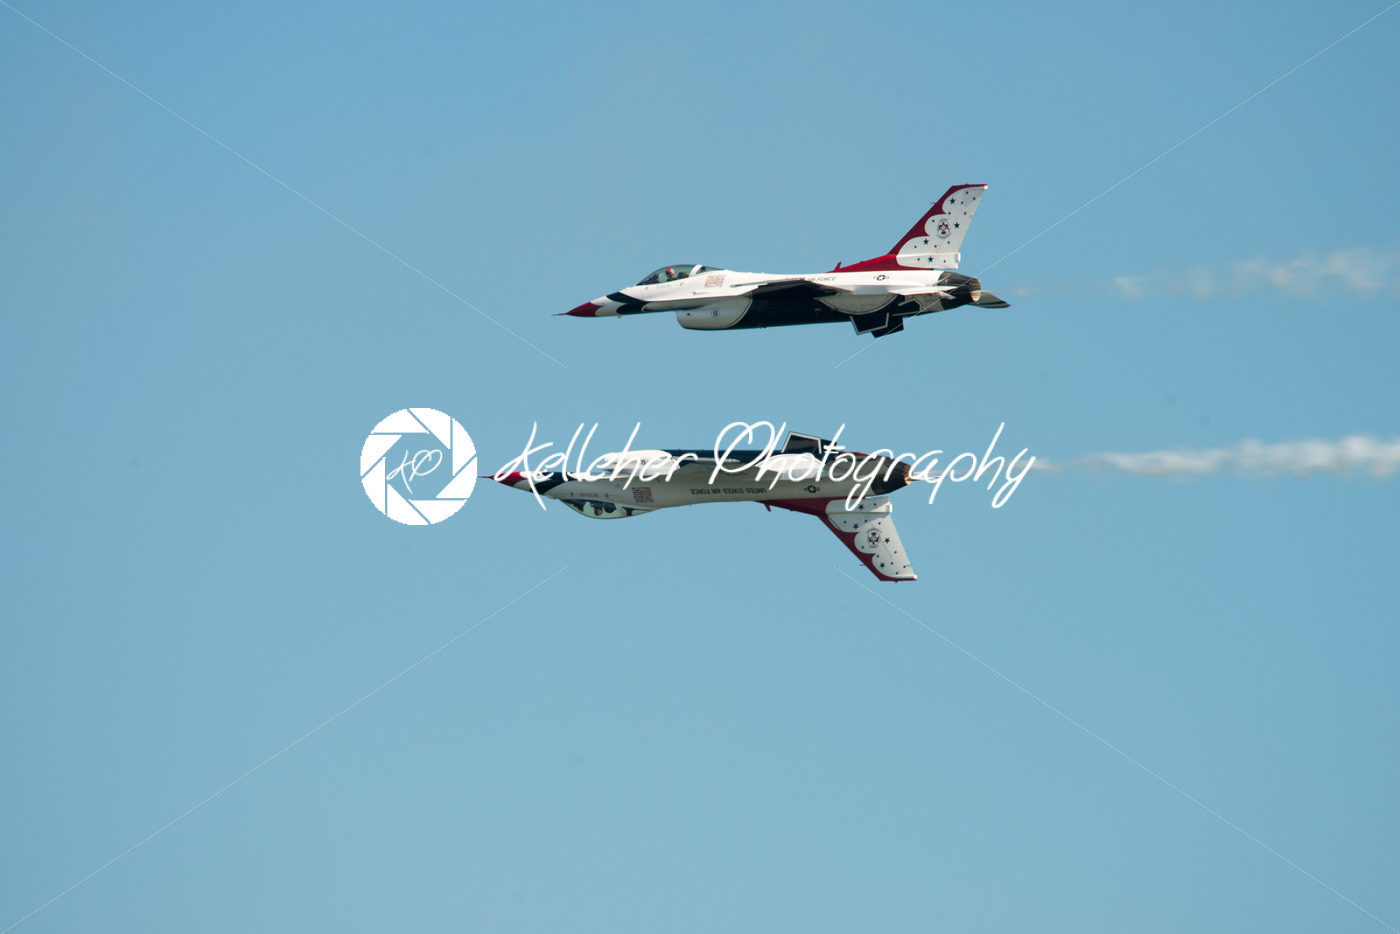 ATLANTIC CITY, NJ – AUGUST 17: U.S. Air Force Thunderbirds at the Annual Atlantic City Air Show on August 17, 2016 - Kelleher Photography Store